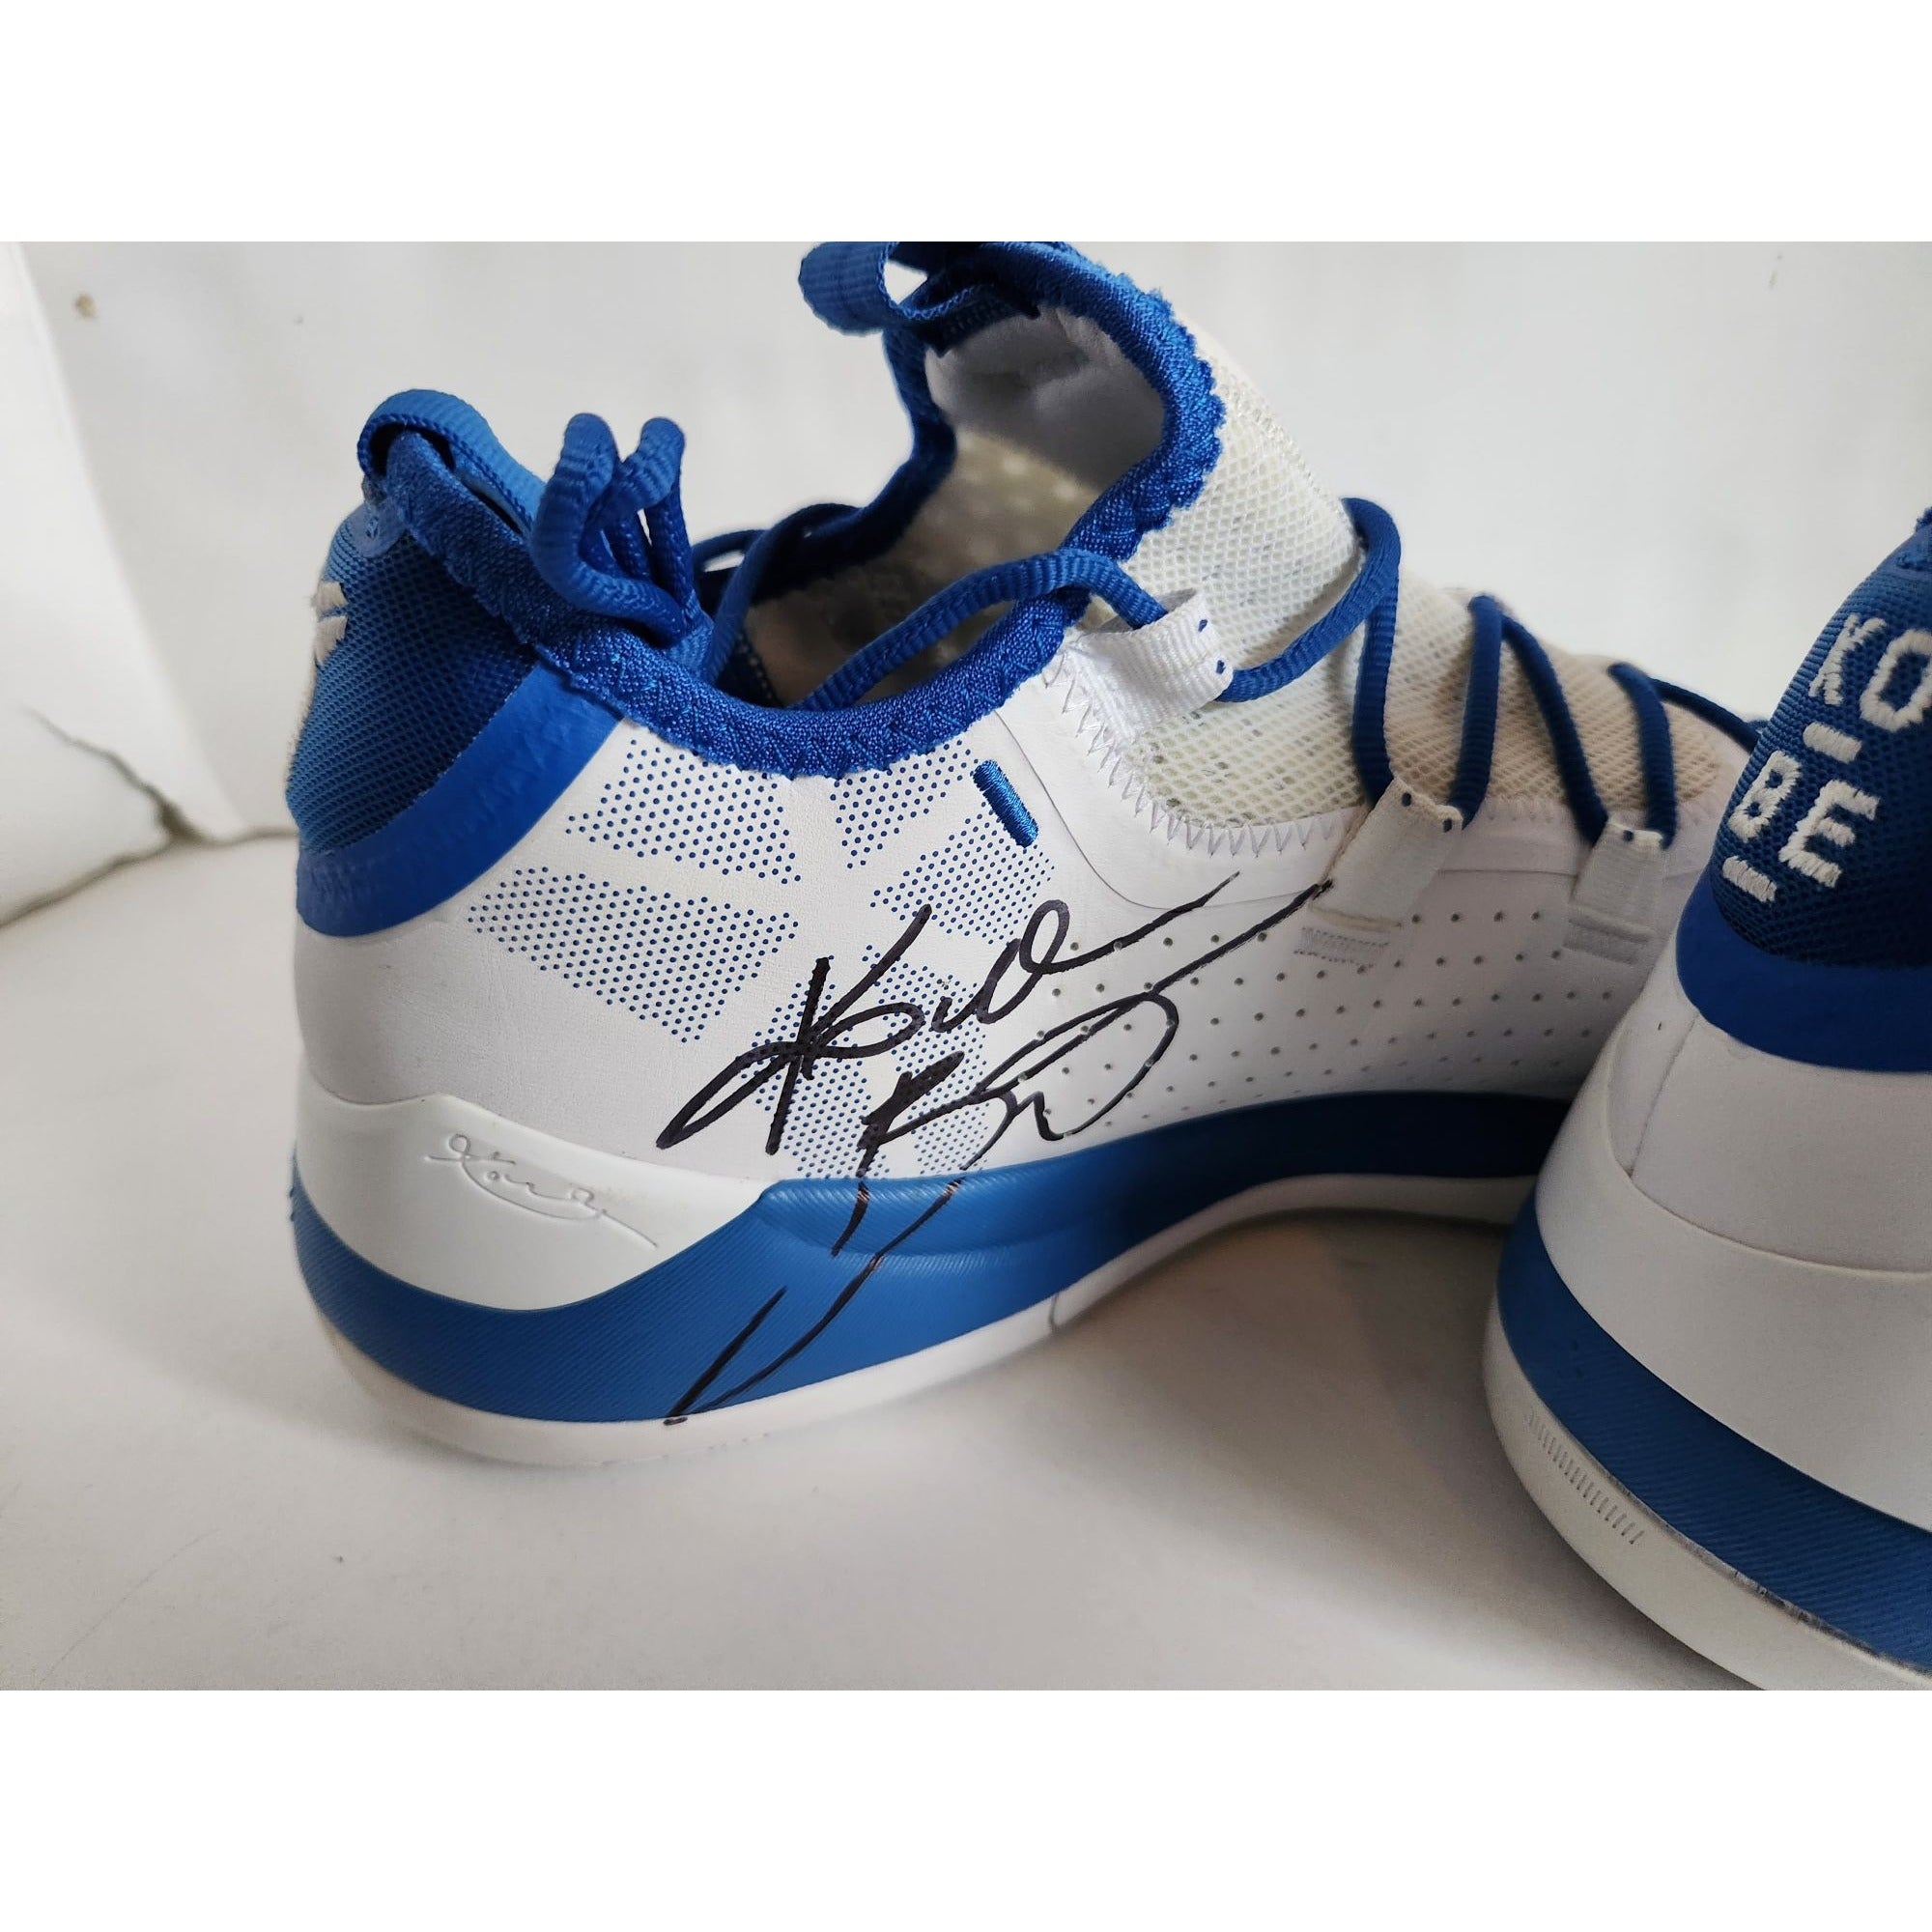 Kobe Bryant "The Mamba" Los Angeles Lakers game model Nike shoes signed with proof